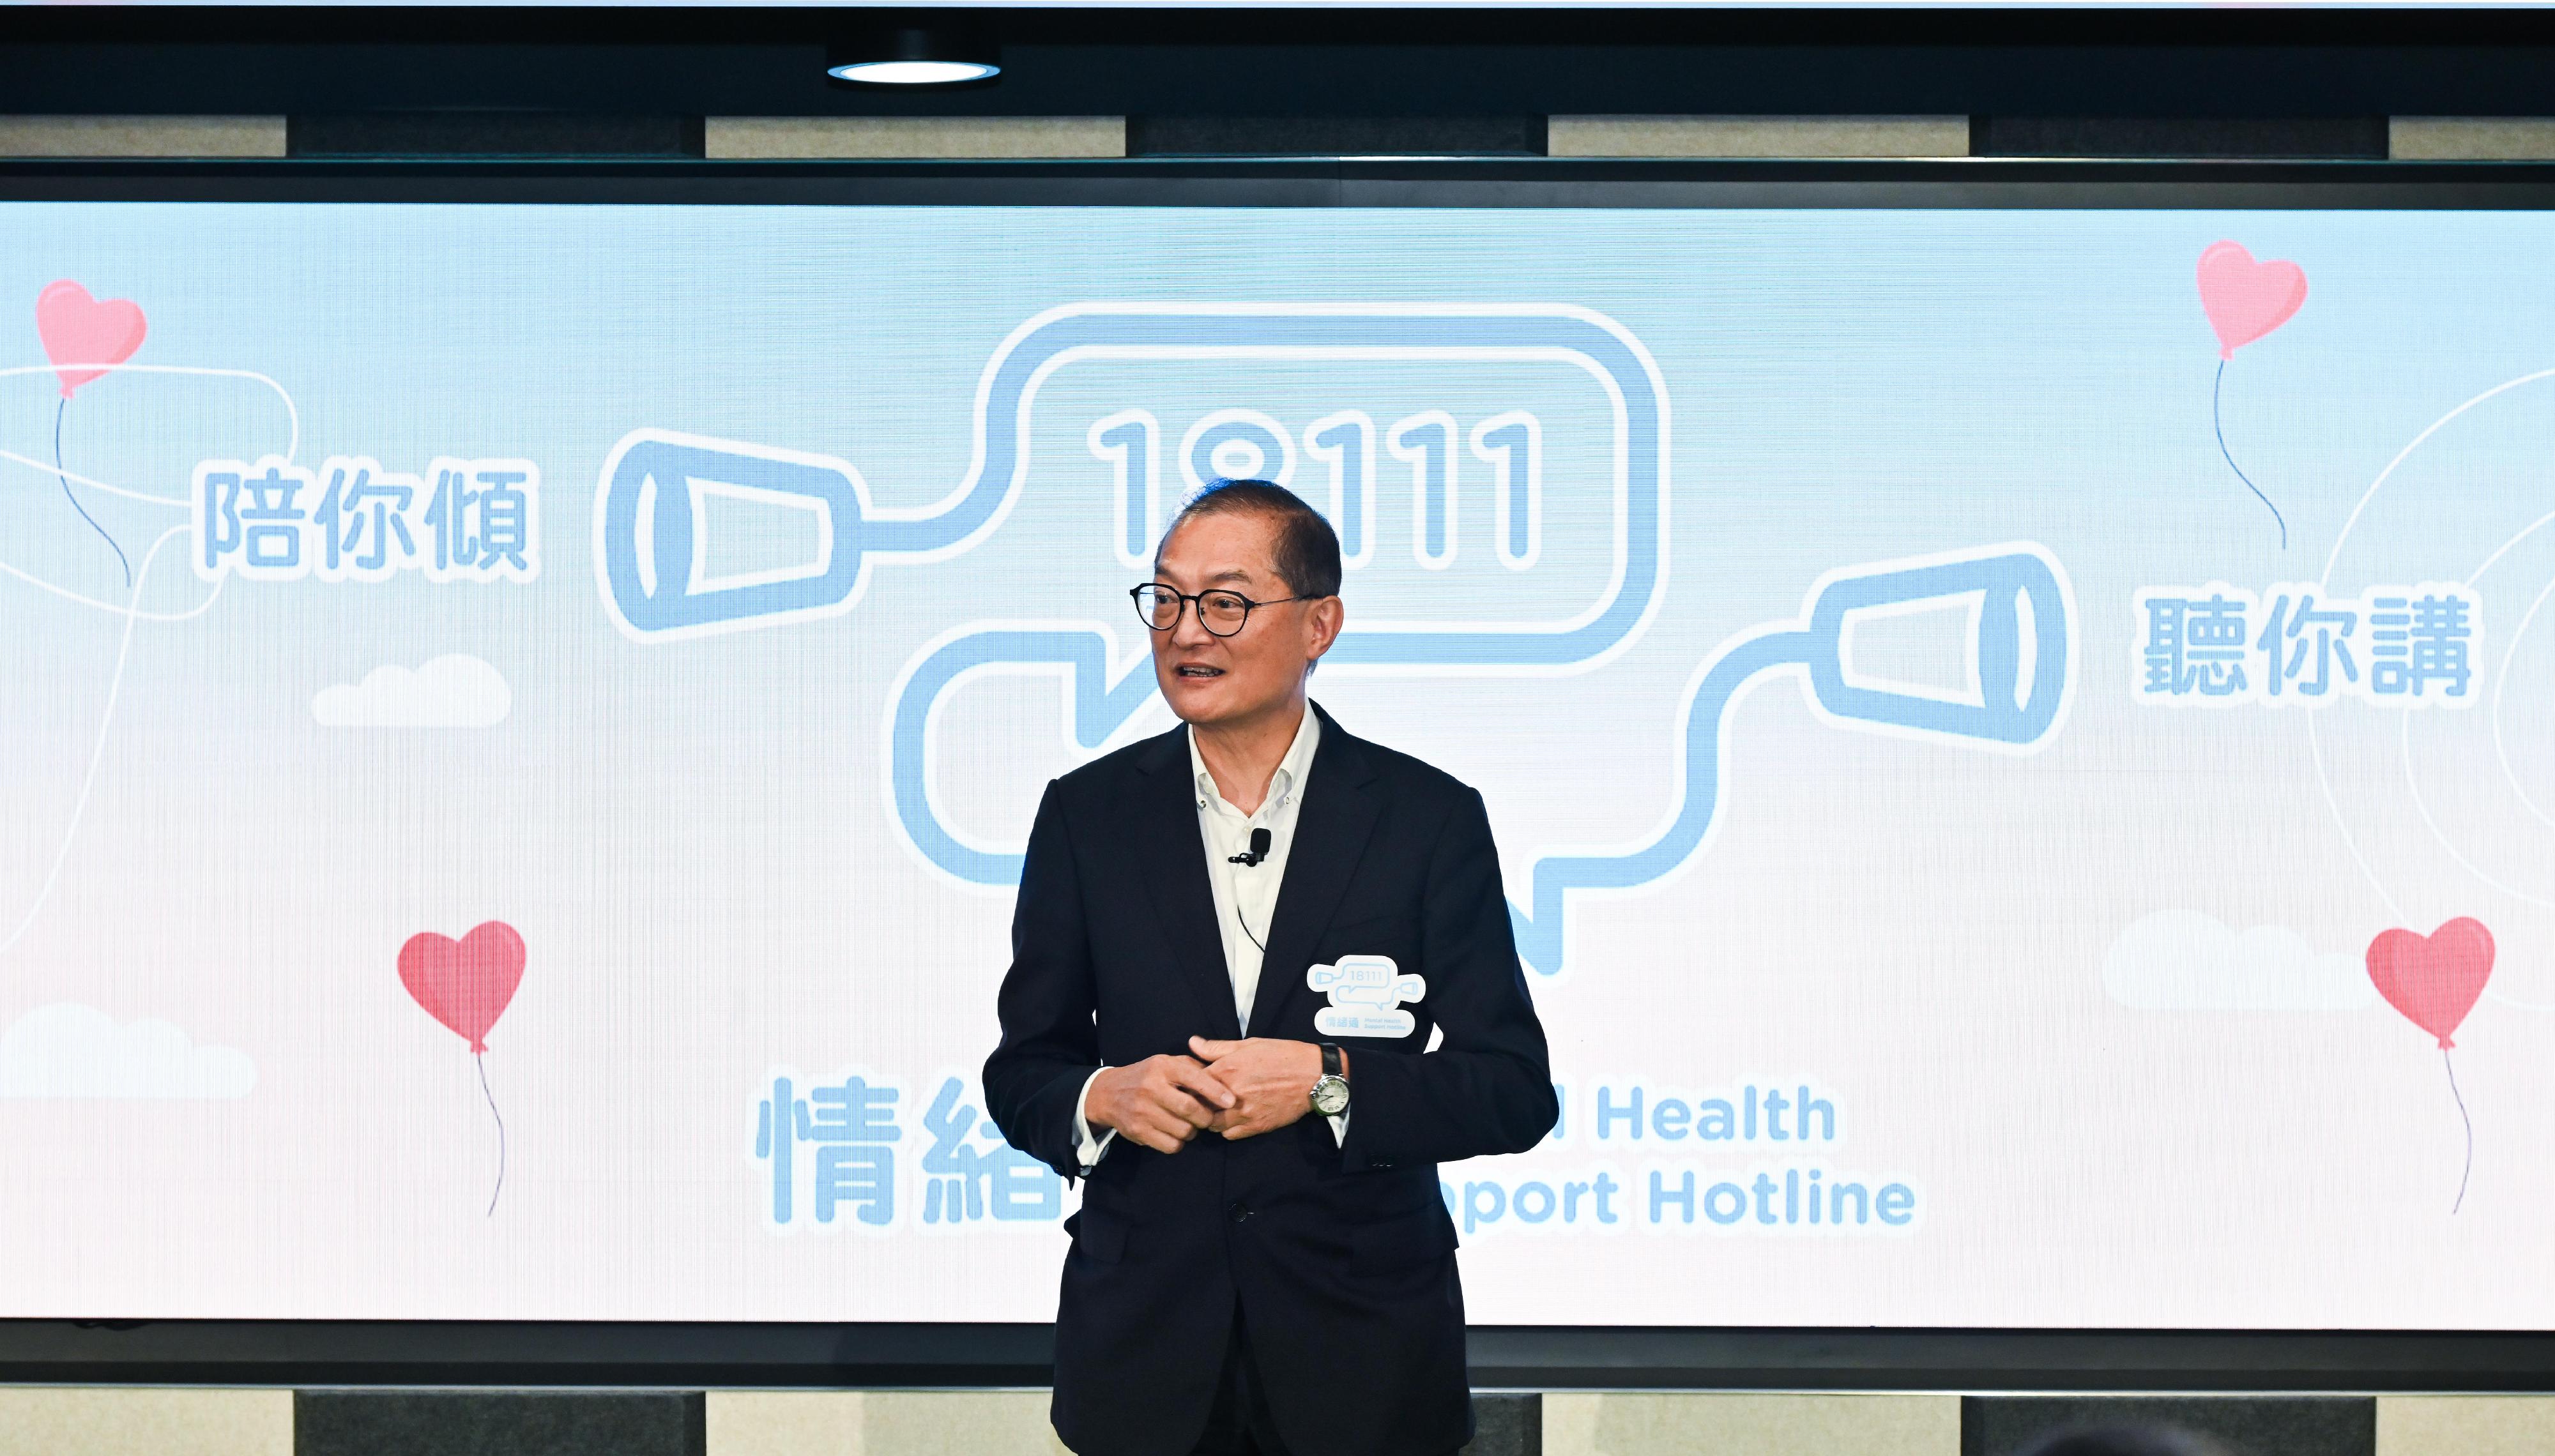 The Secretary for Health, Professor Lo Chung-mau, delivers a speech at the kick-off ceremony of the "18111 - Mental Health Support Hotlink" this afternoon (December 27), encouraging people with mental health needs to call the hotline and seek help.